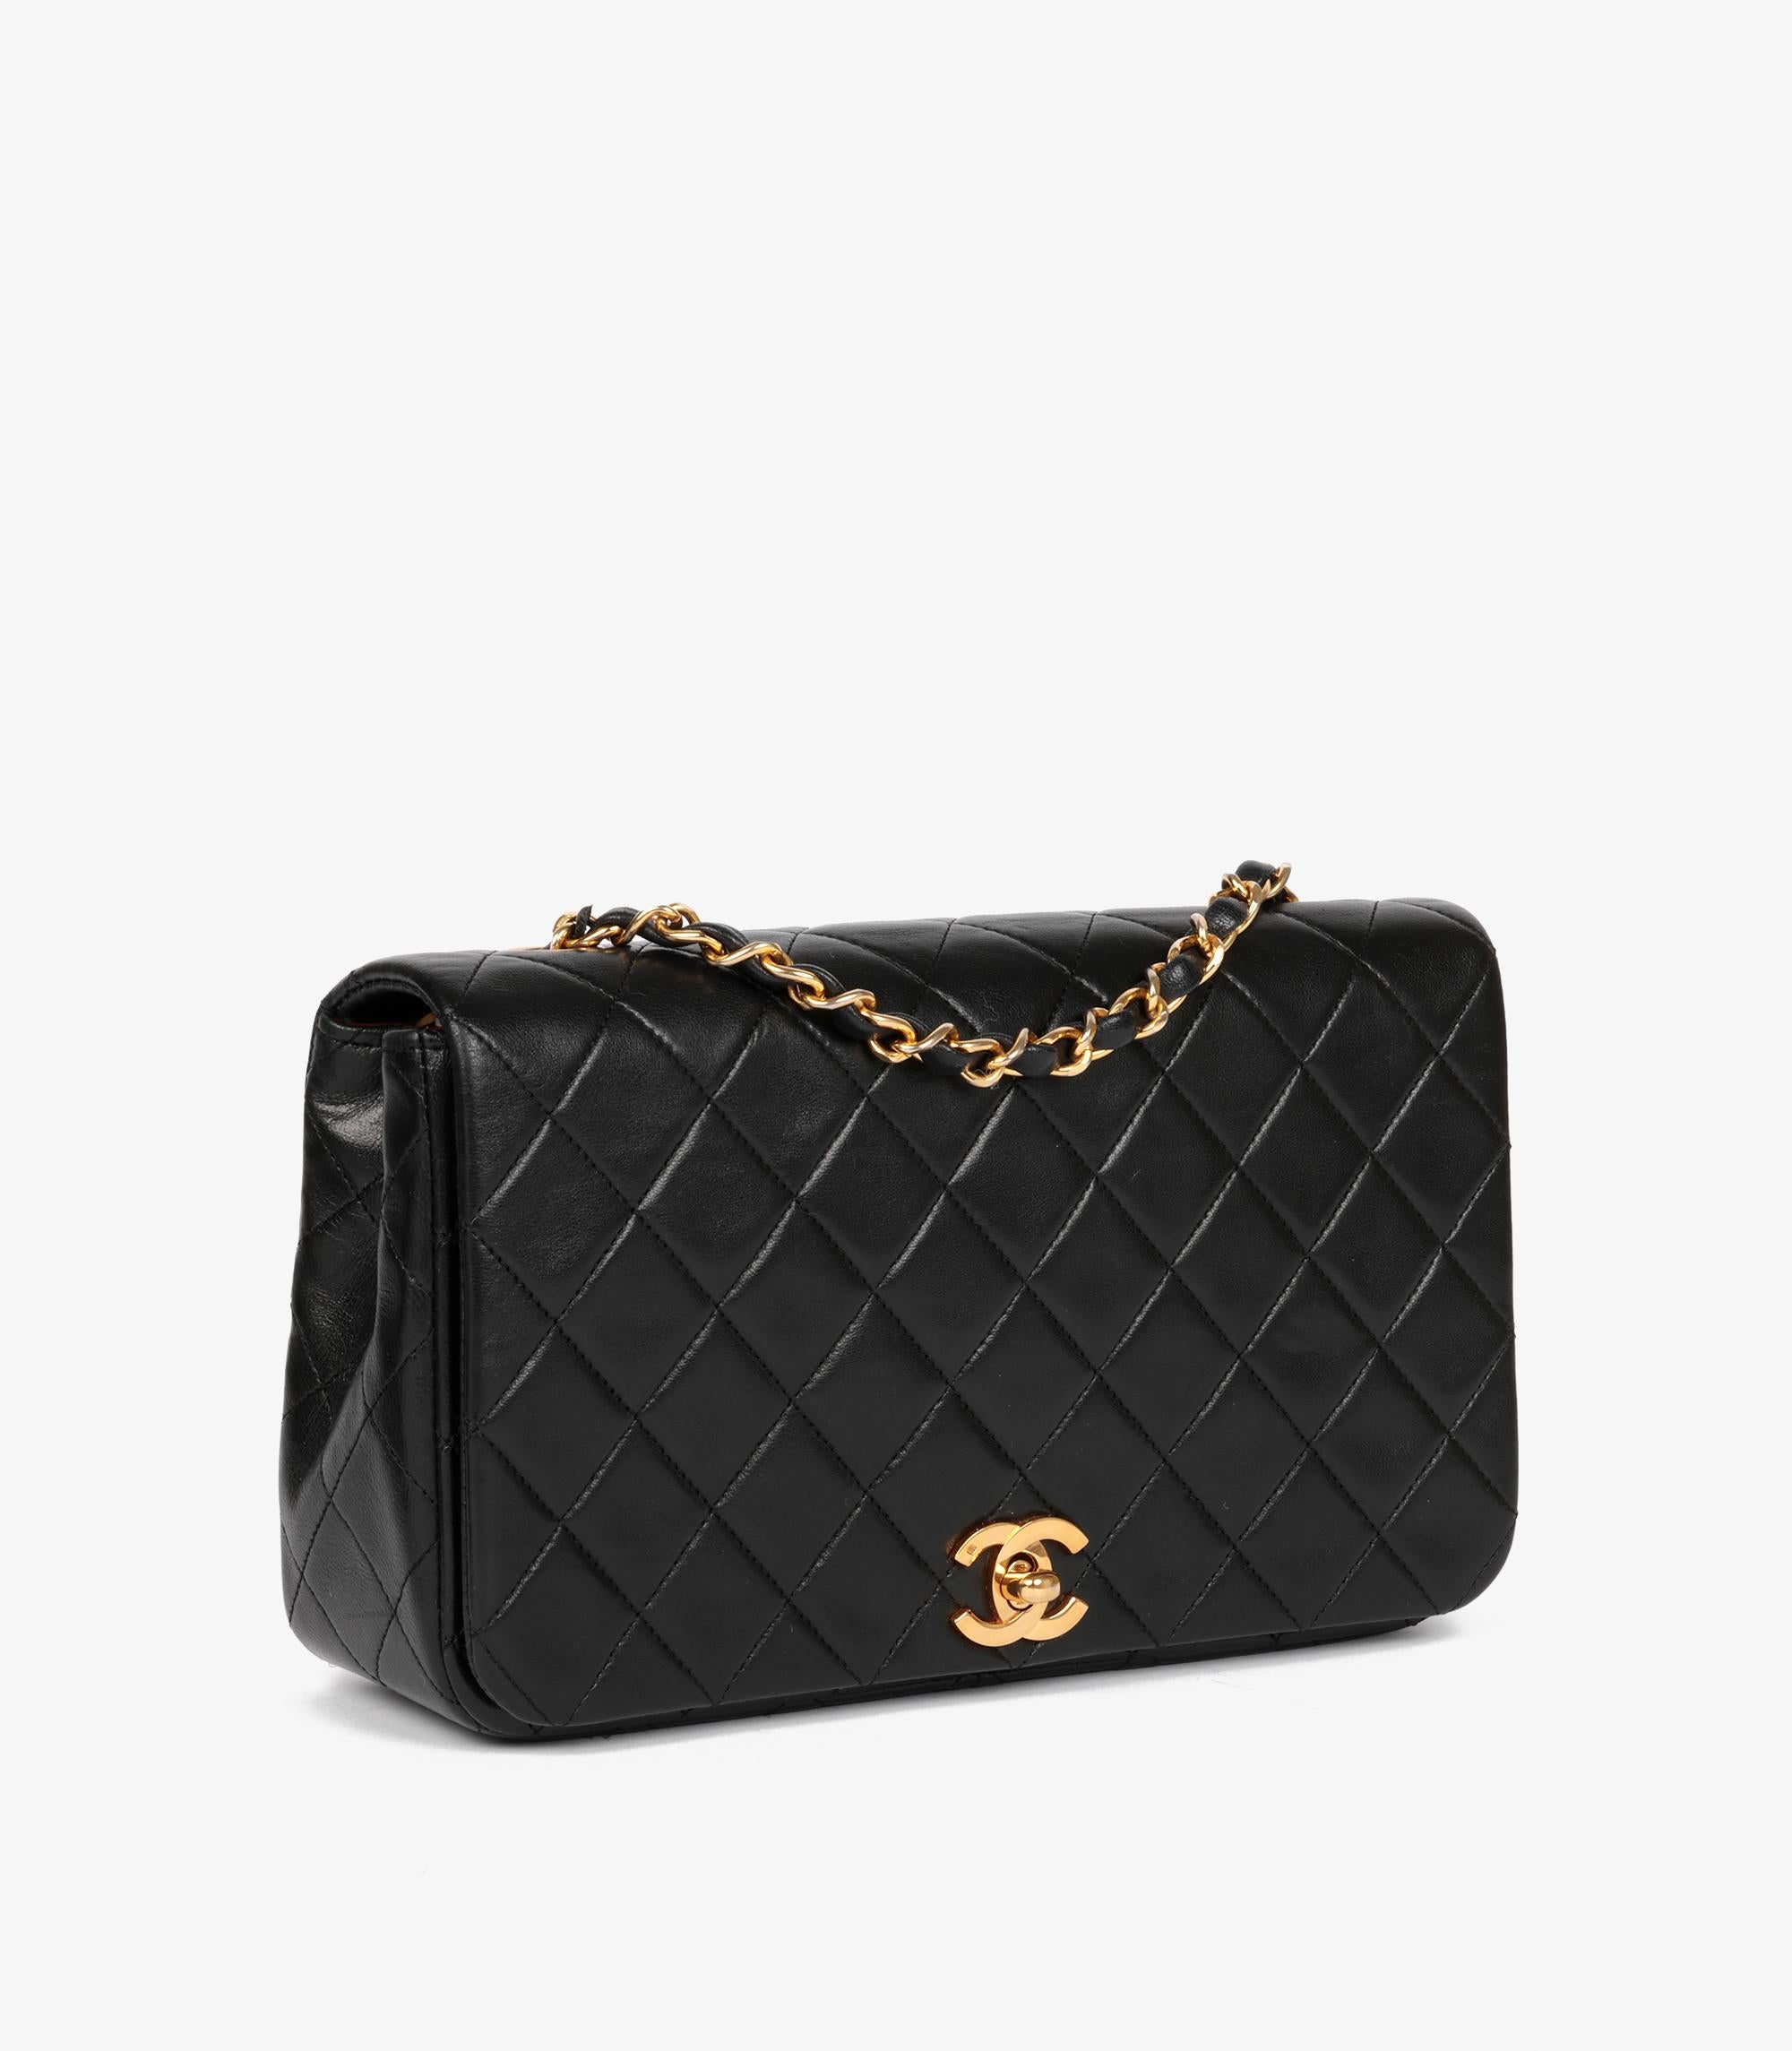 Chanel Black Quilted Lambskin Vintage Small Classic Single Full Flap Bag In Excellent Condition For Sale In Bishop's Stortford, Hertfordshire